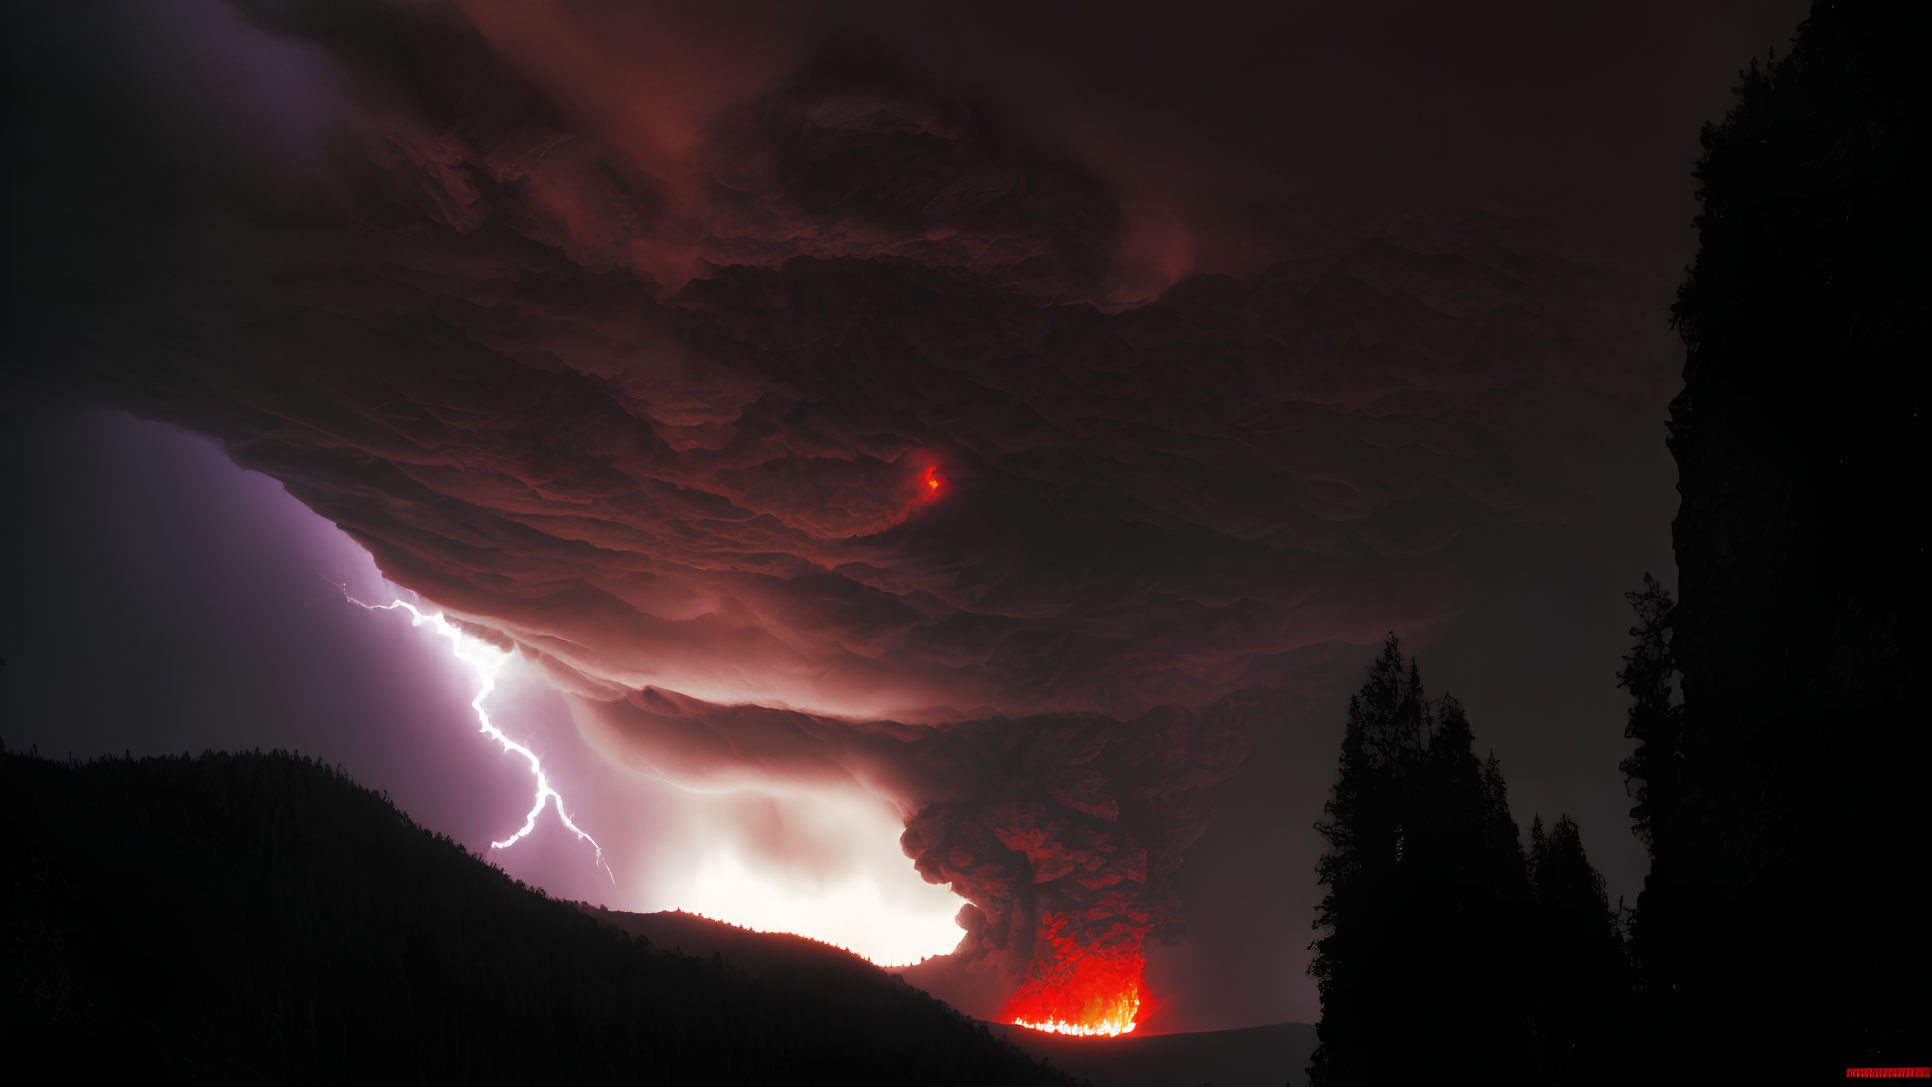 Wildfire Night Scene: Lightning, Red Glow, Smoke Clouds in Forest